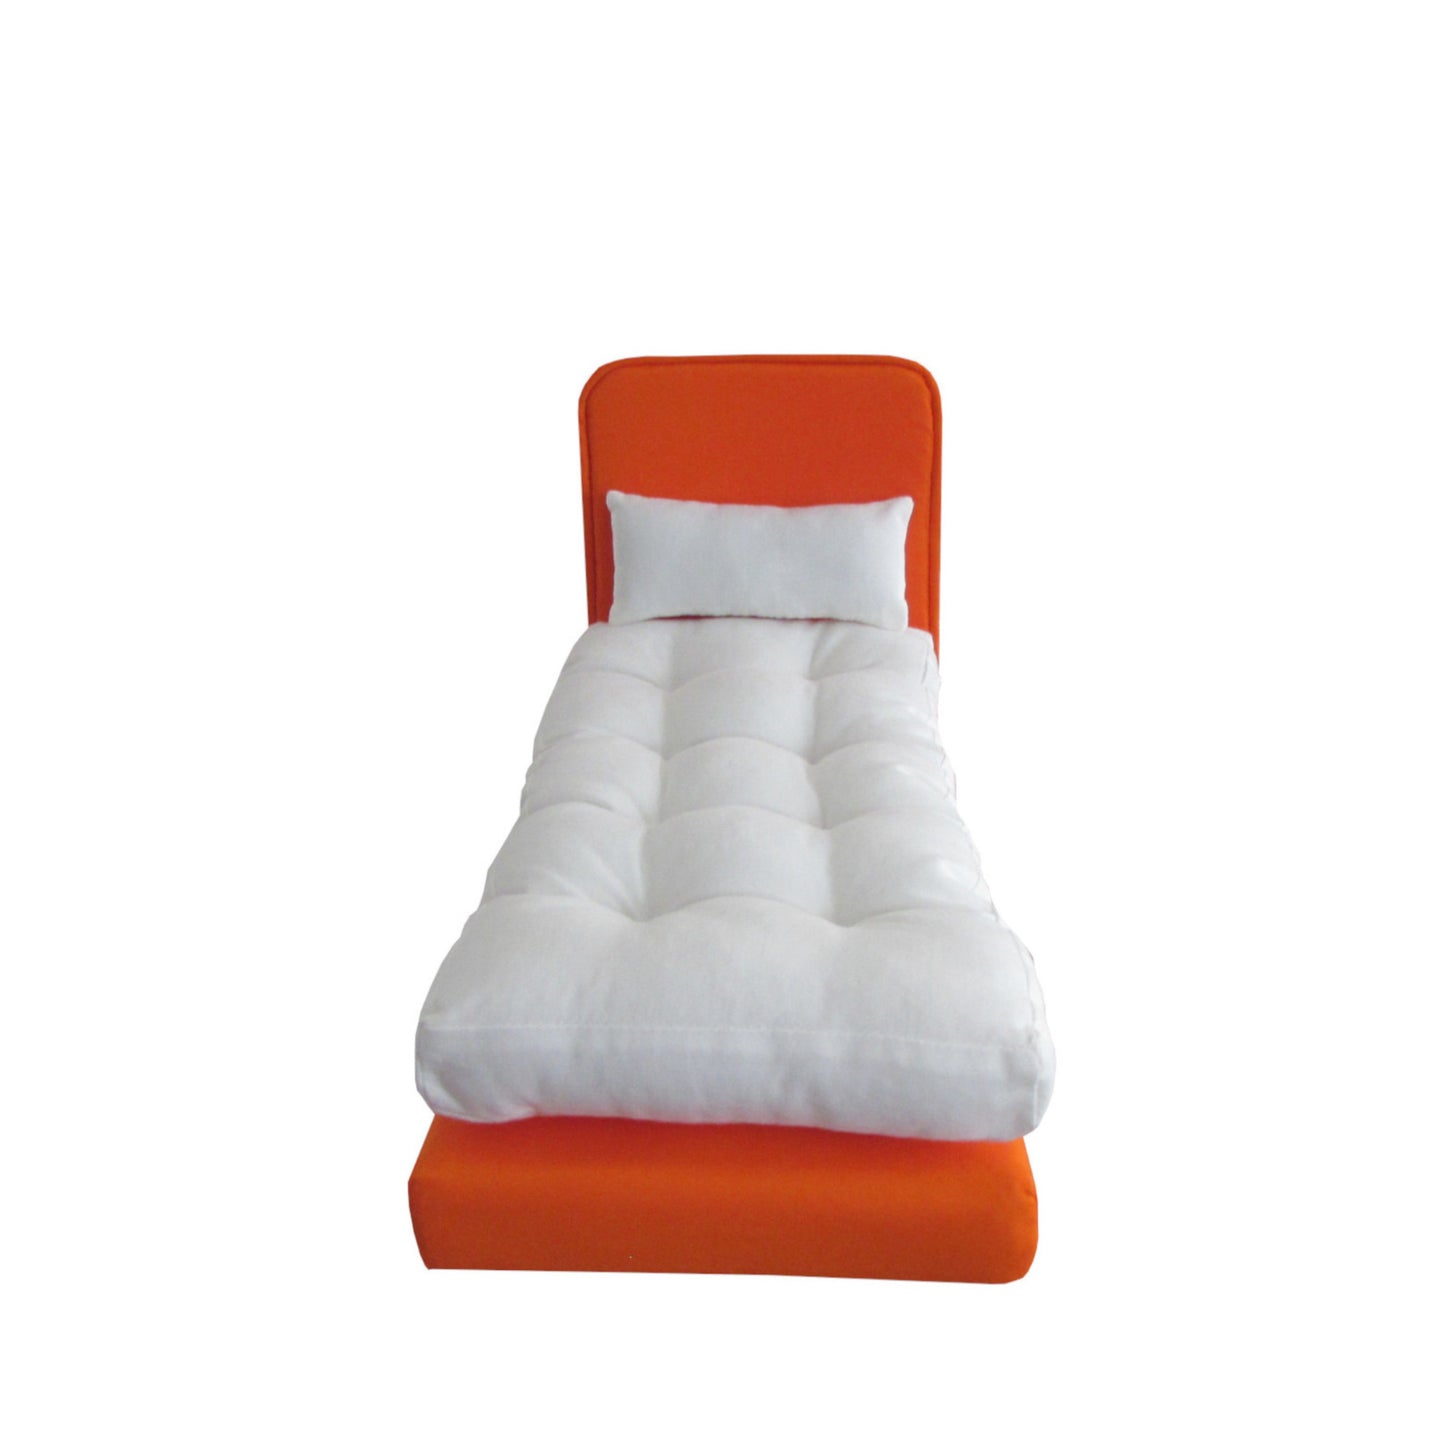 Upholstered Orange Doll Bed for 11 1/2-inch and 12-inch dolls Front View